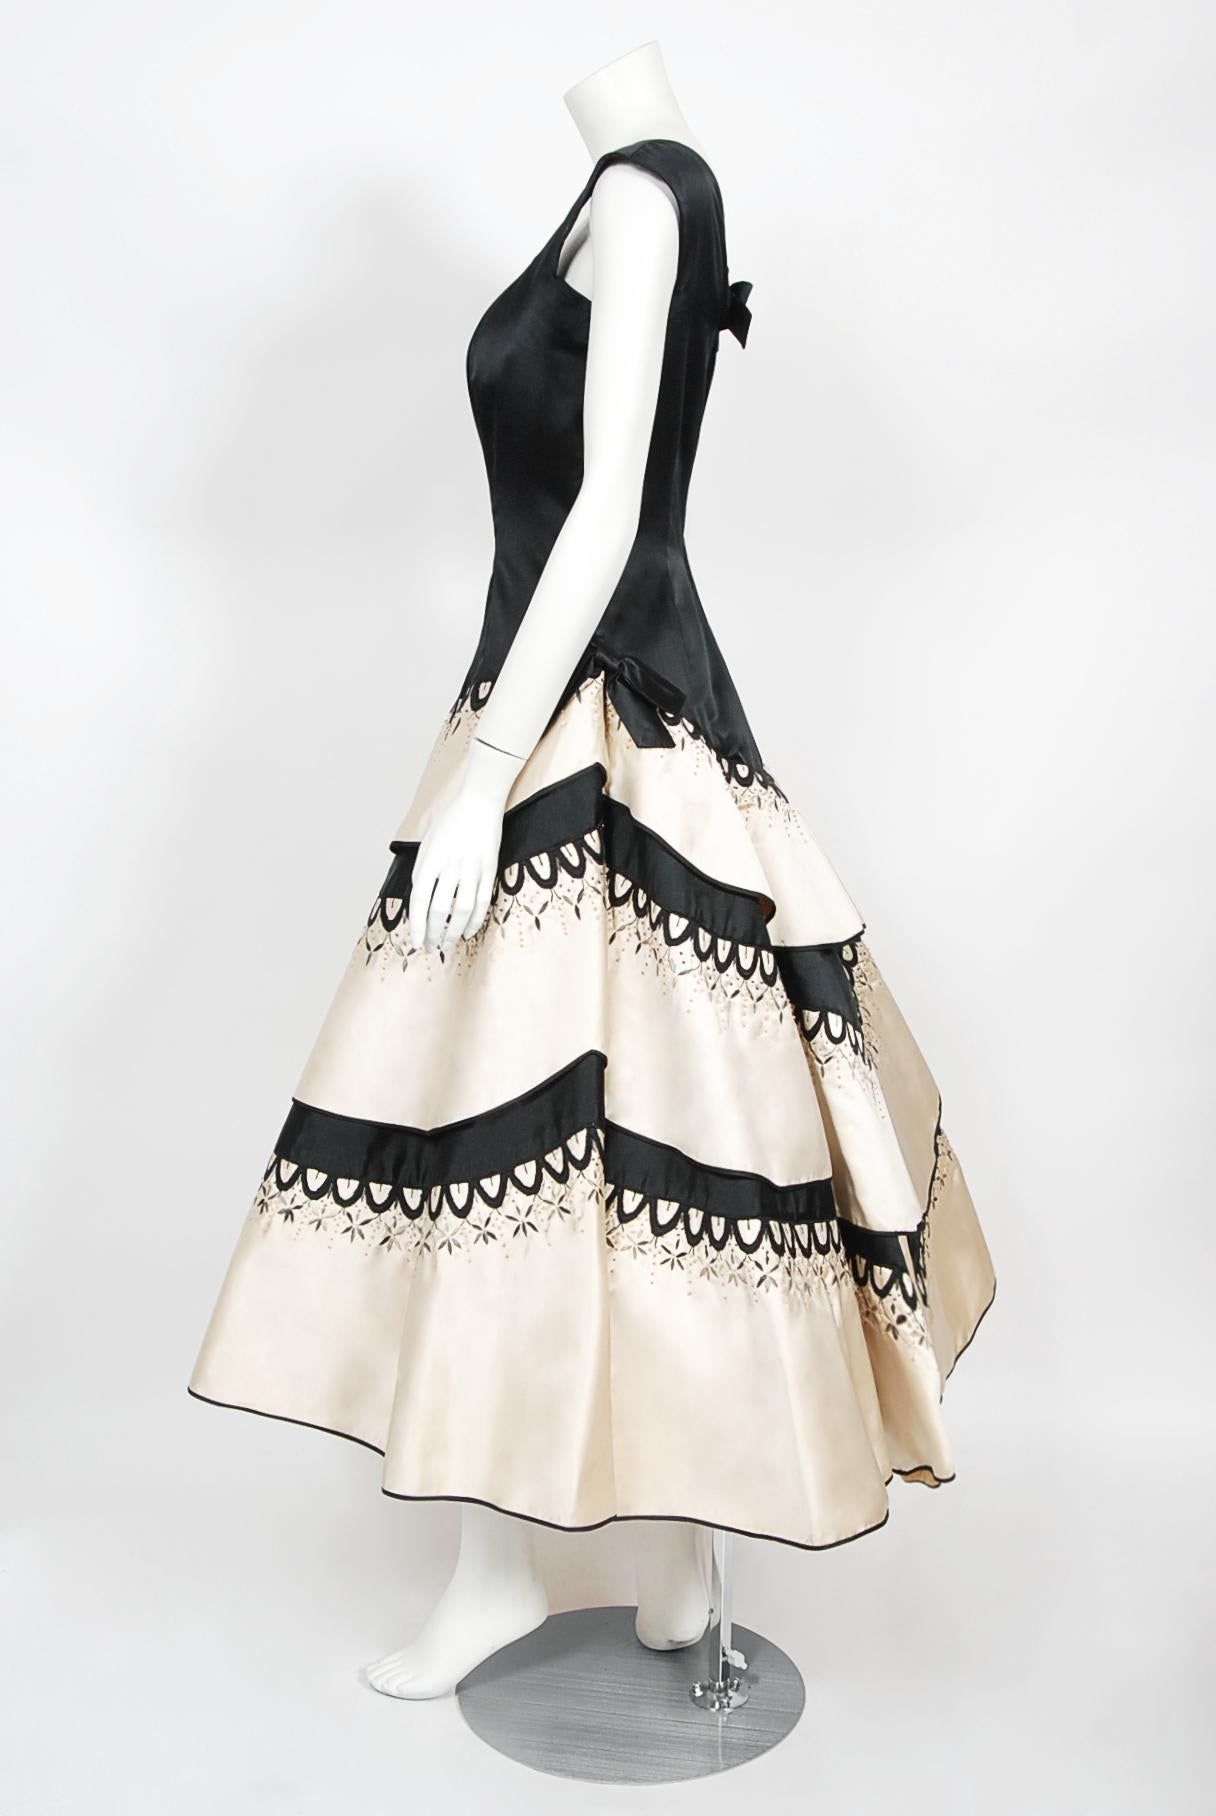 Vintage 1950's Emilio Schuberth Couture Black & Ivory Embroidered Satin Dress For Sale 8